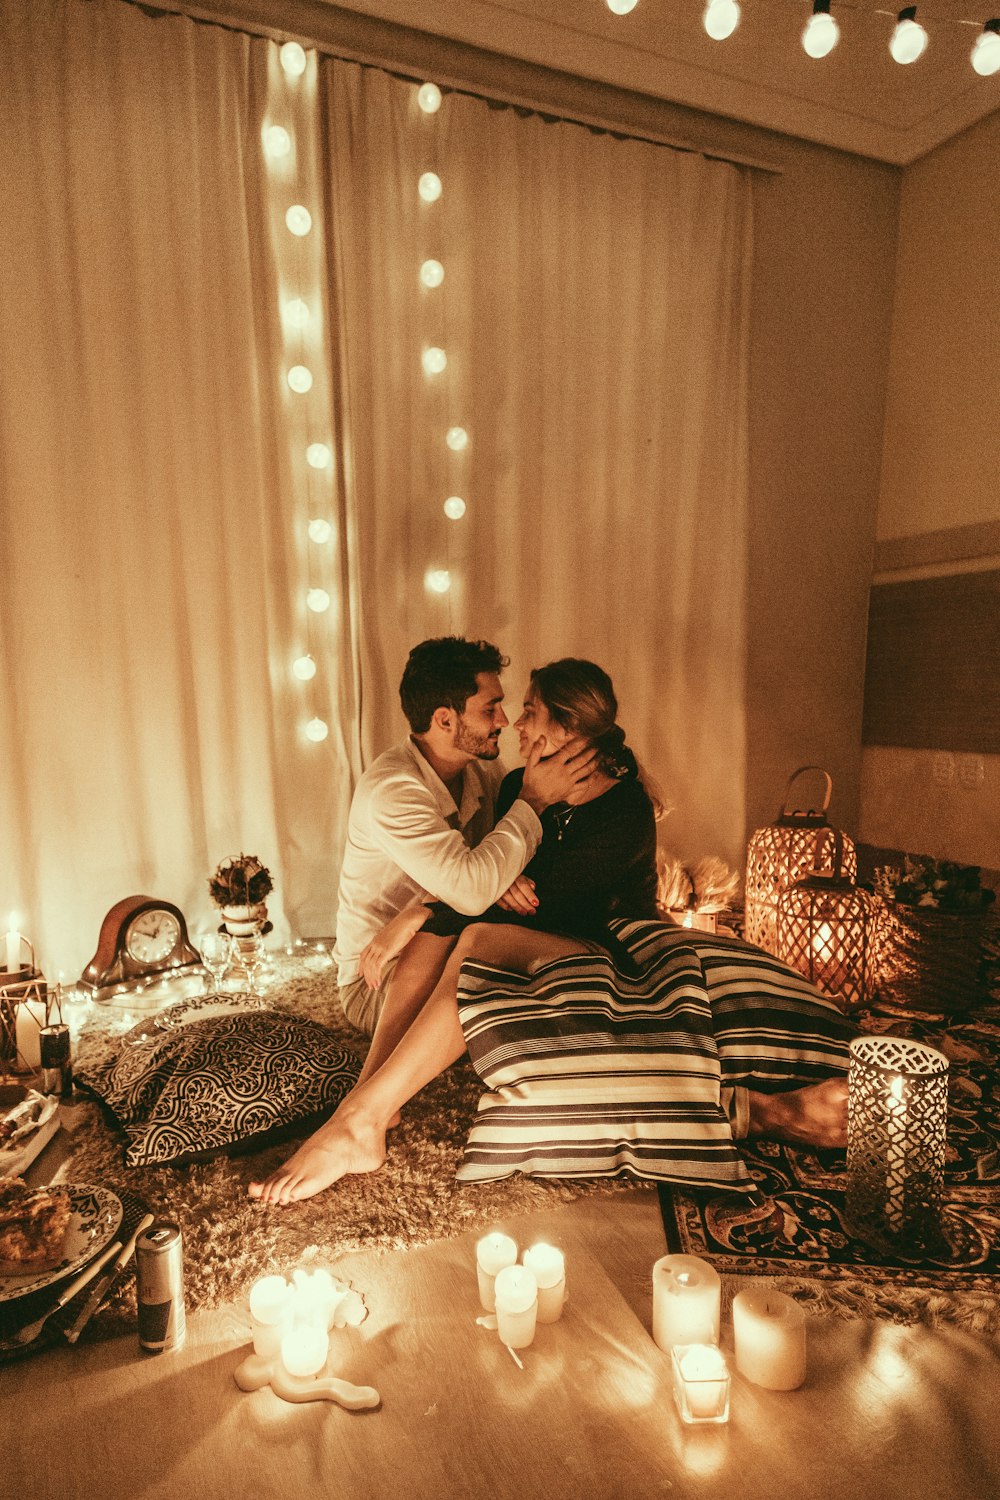 man and woman sitting on floor and about to kiss with lighted candles inside room